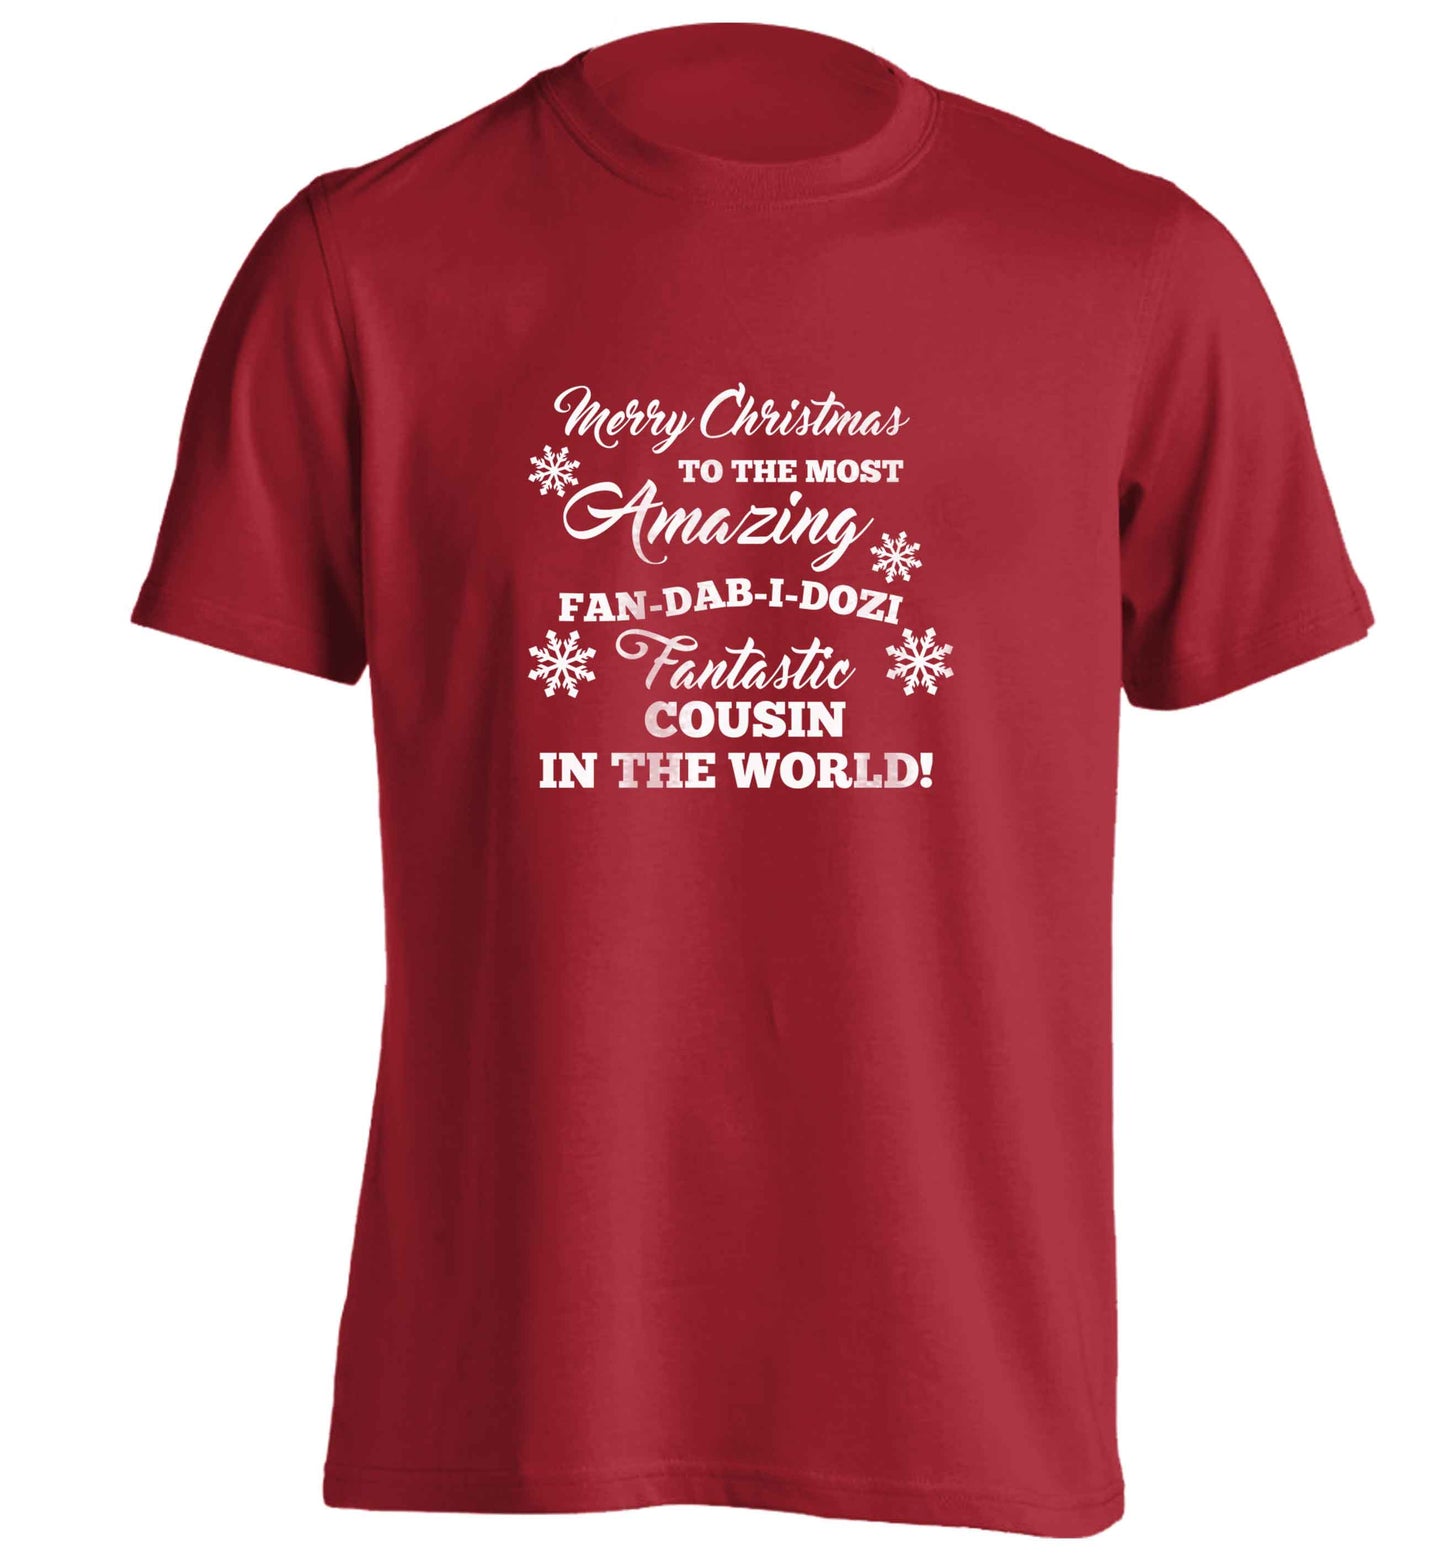 Merry Christmas to the most amazing fan-dab-i-dozi fantasic Cousin in the world adults unisex red Tshirt 2XL